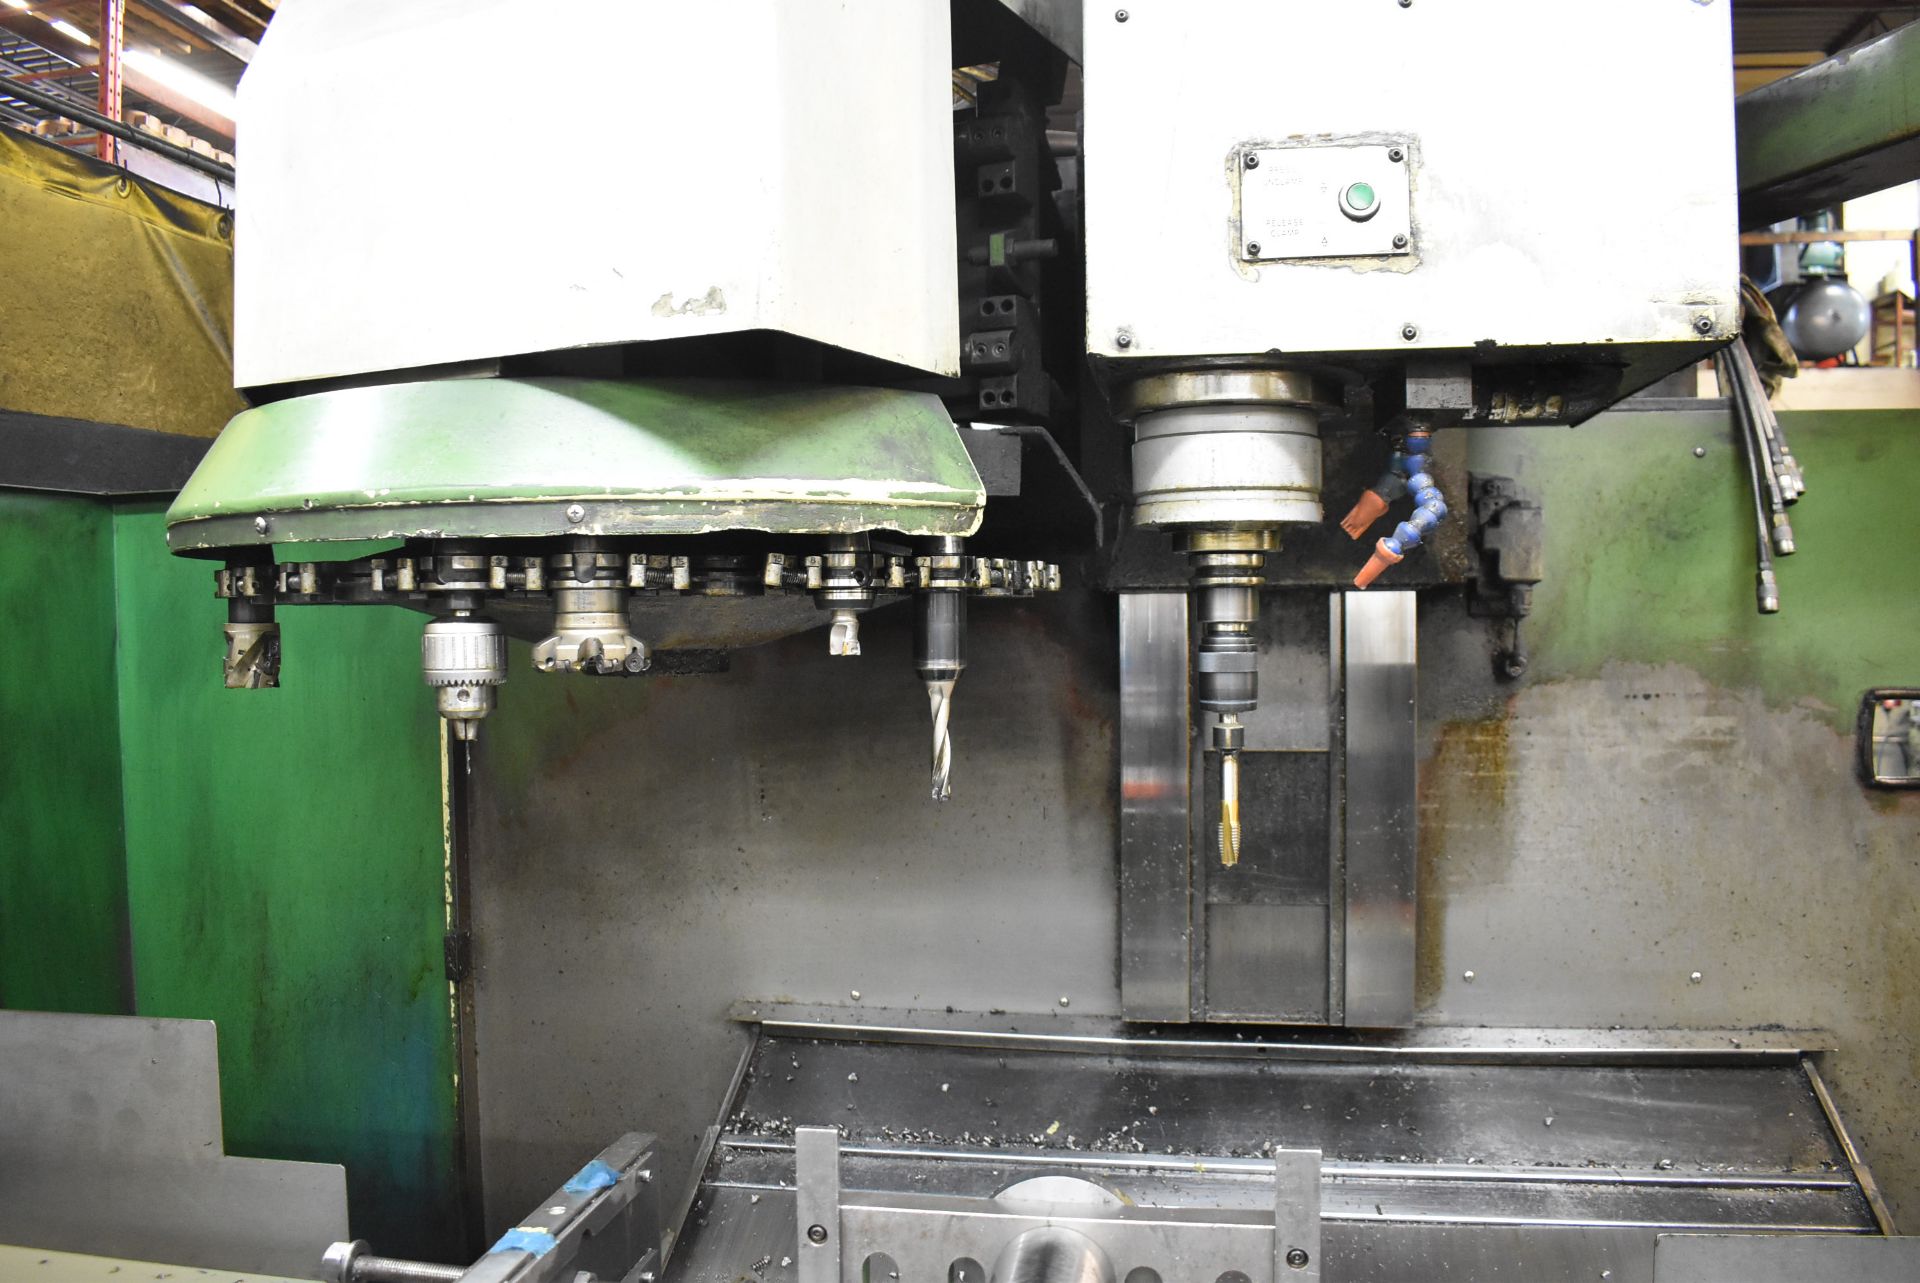 LEADWELL MCV-760XL CNC VERTICAL MACHINING CENTER WITH FANUC OM CNC CONTROL, 19.5" X 39" T-SLOT - Image 4 of 6